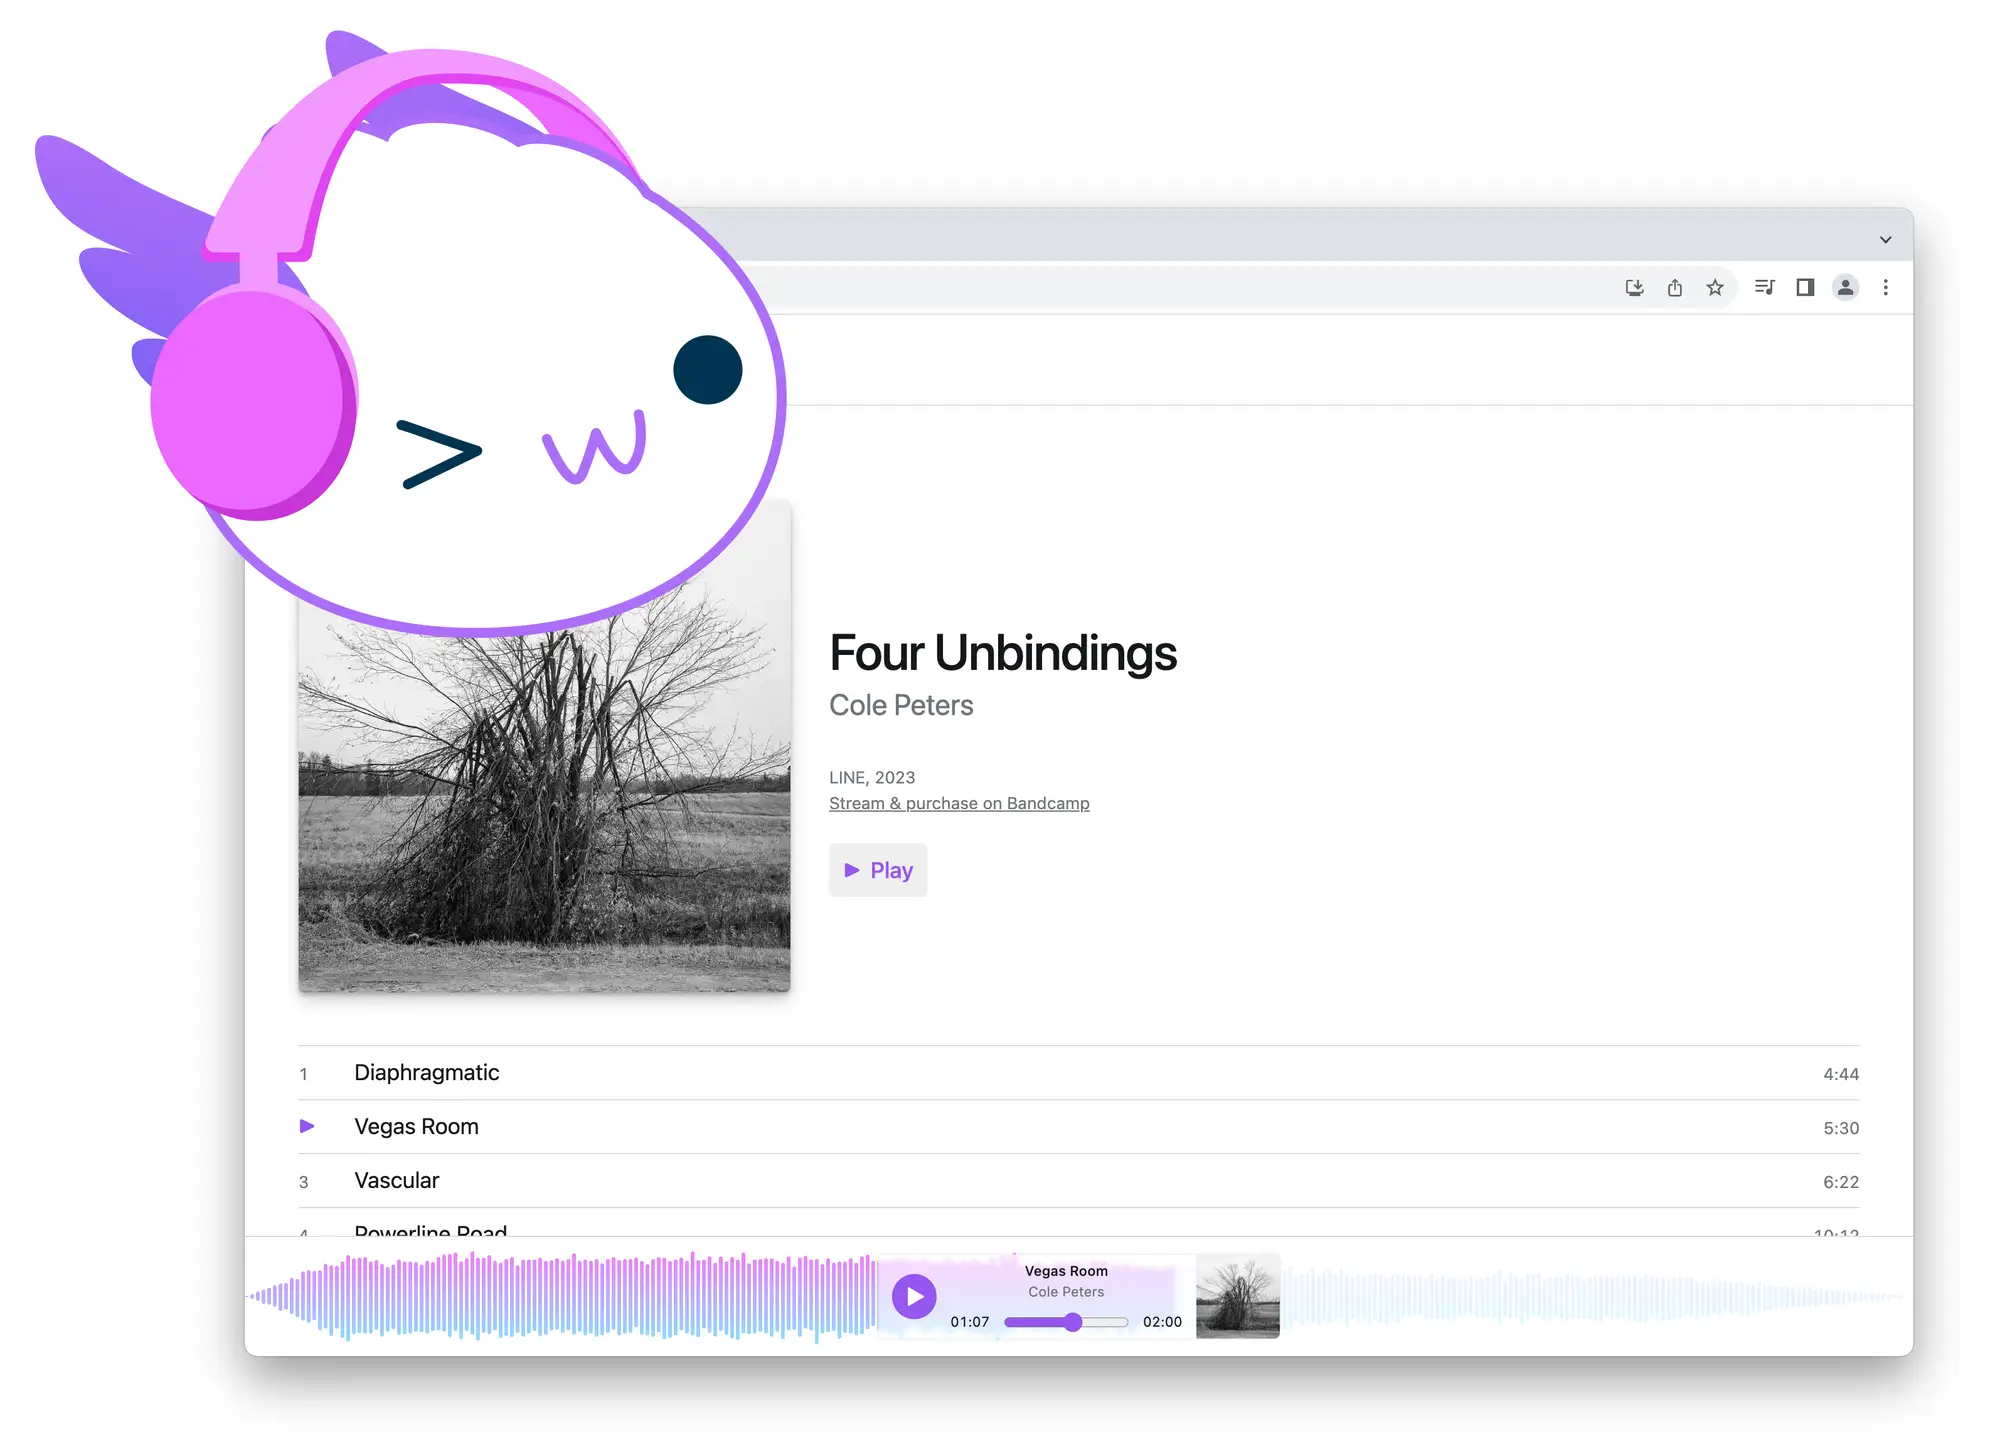 Axol the axolotl wearing headphones and winking, with a music library and audio player in a browser window below